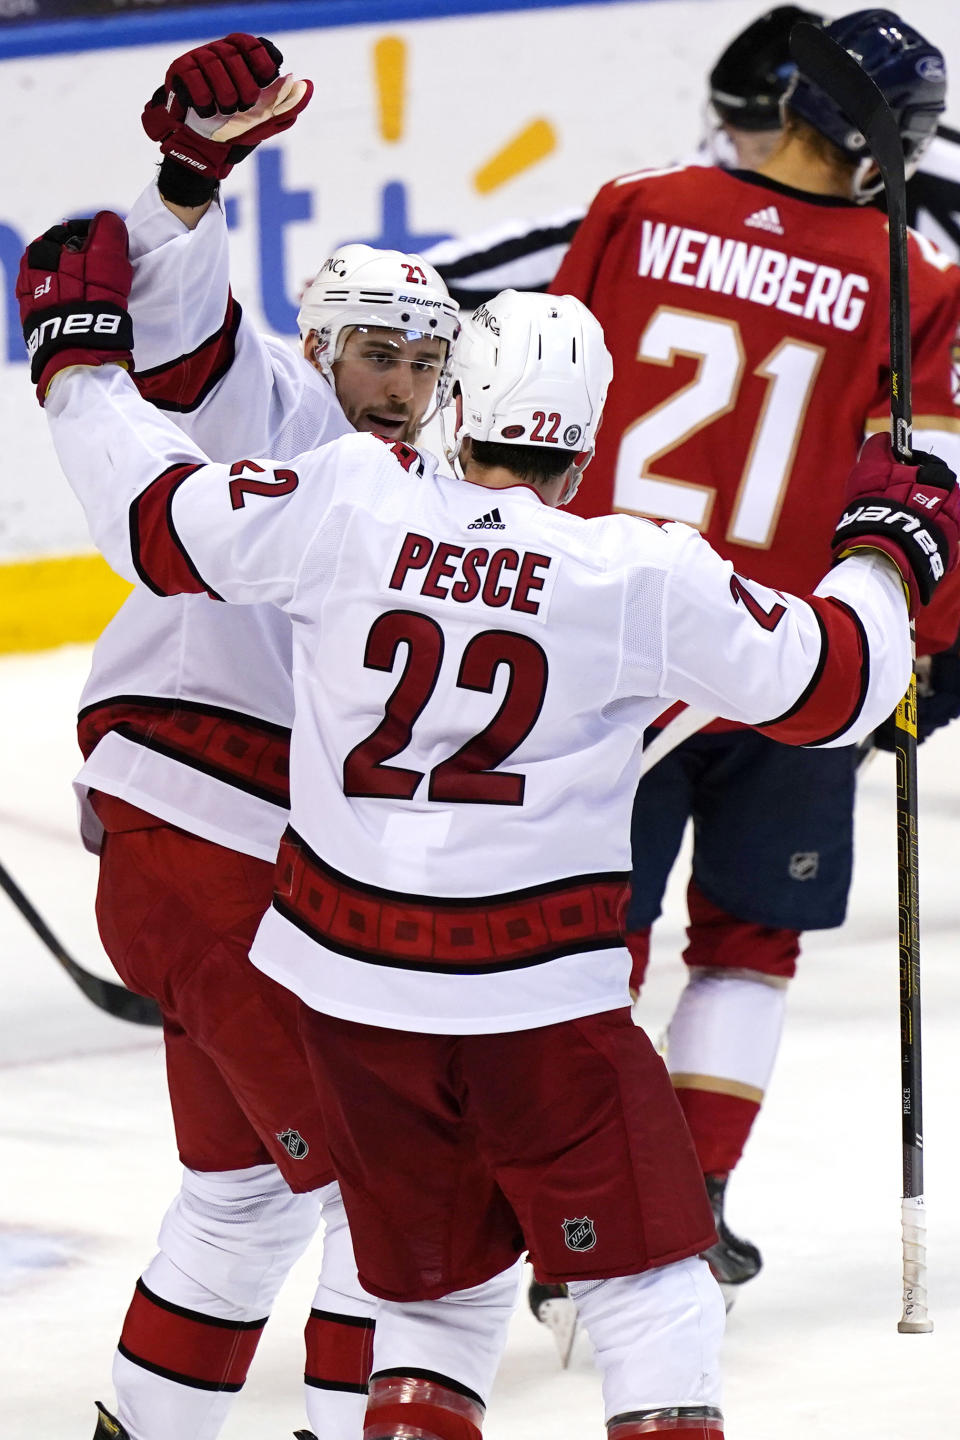 Carolina Hurricanes right wing Nino Niederreiter and defenseman Brett Pesce (22) celebrate after Niederreiter scored a goal during the second period of the team's NHL hockey game against the Florida Panthers, Thursday, April 22, 2021, in Sunrise, Fla. (AP Photo/Marta Lavandier)